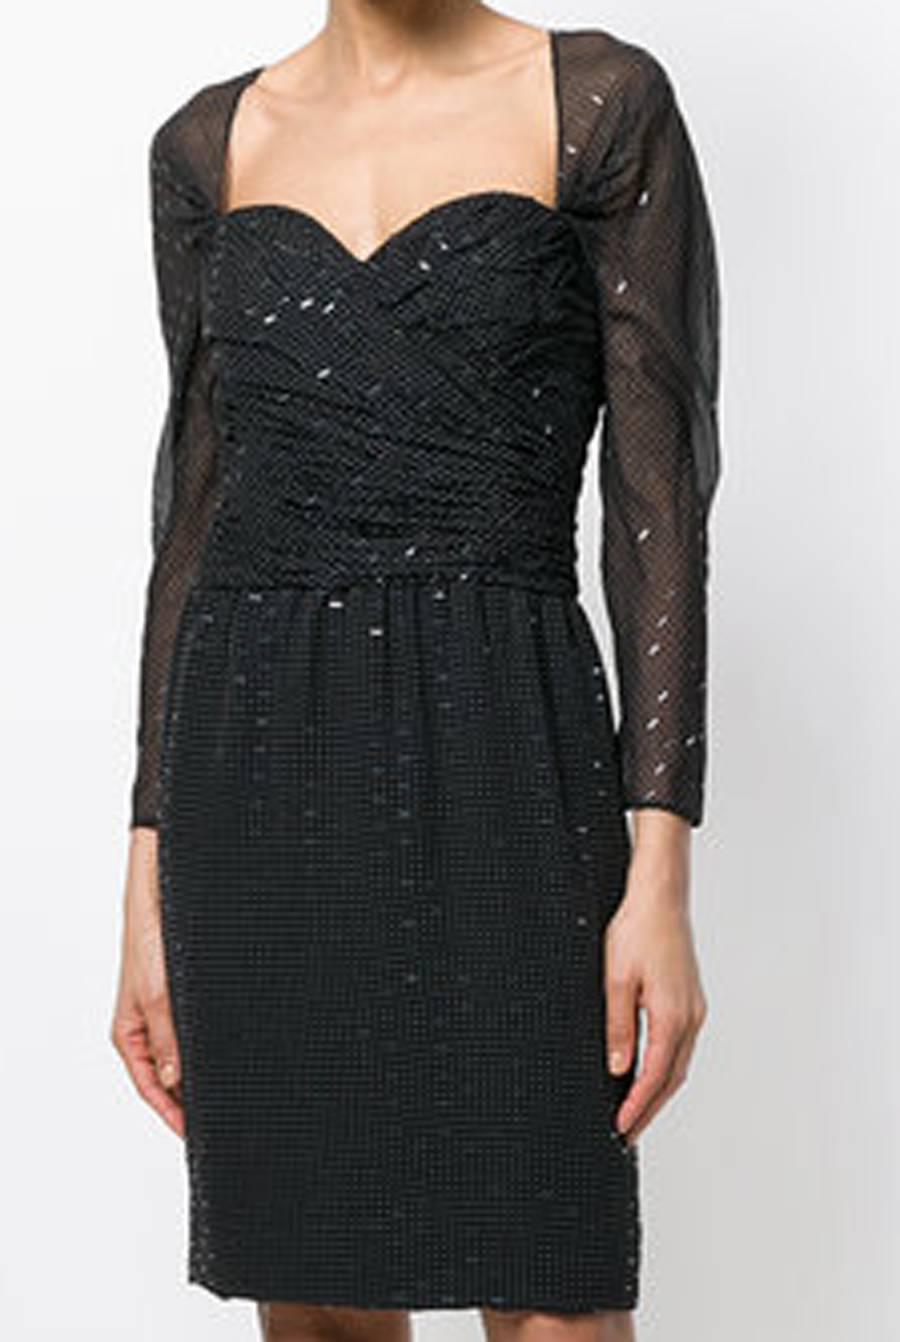 Christian Dior black mousseline printed silk dress featuring a white polka dot pattern, this party dress is embellished with clear embroidered detailing. With a feminine sweetheart neck, it features an invisible back zip fastening, long sheer